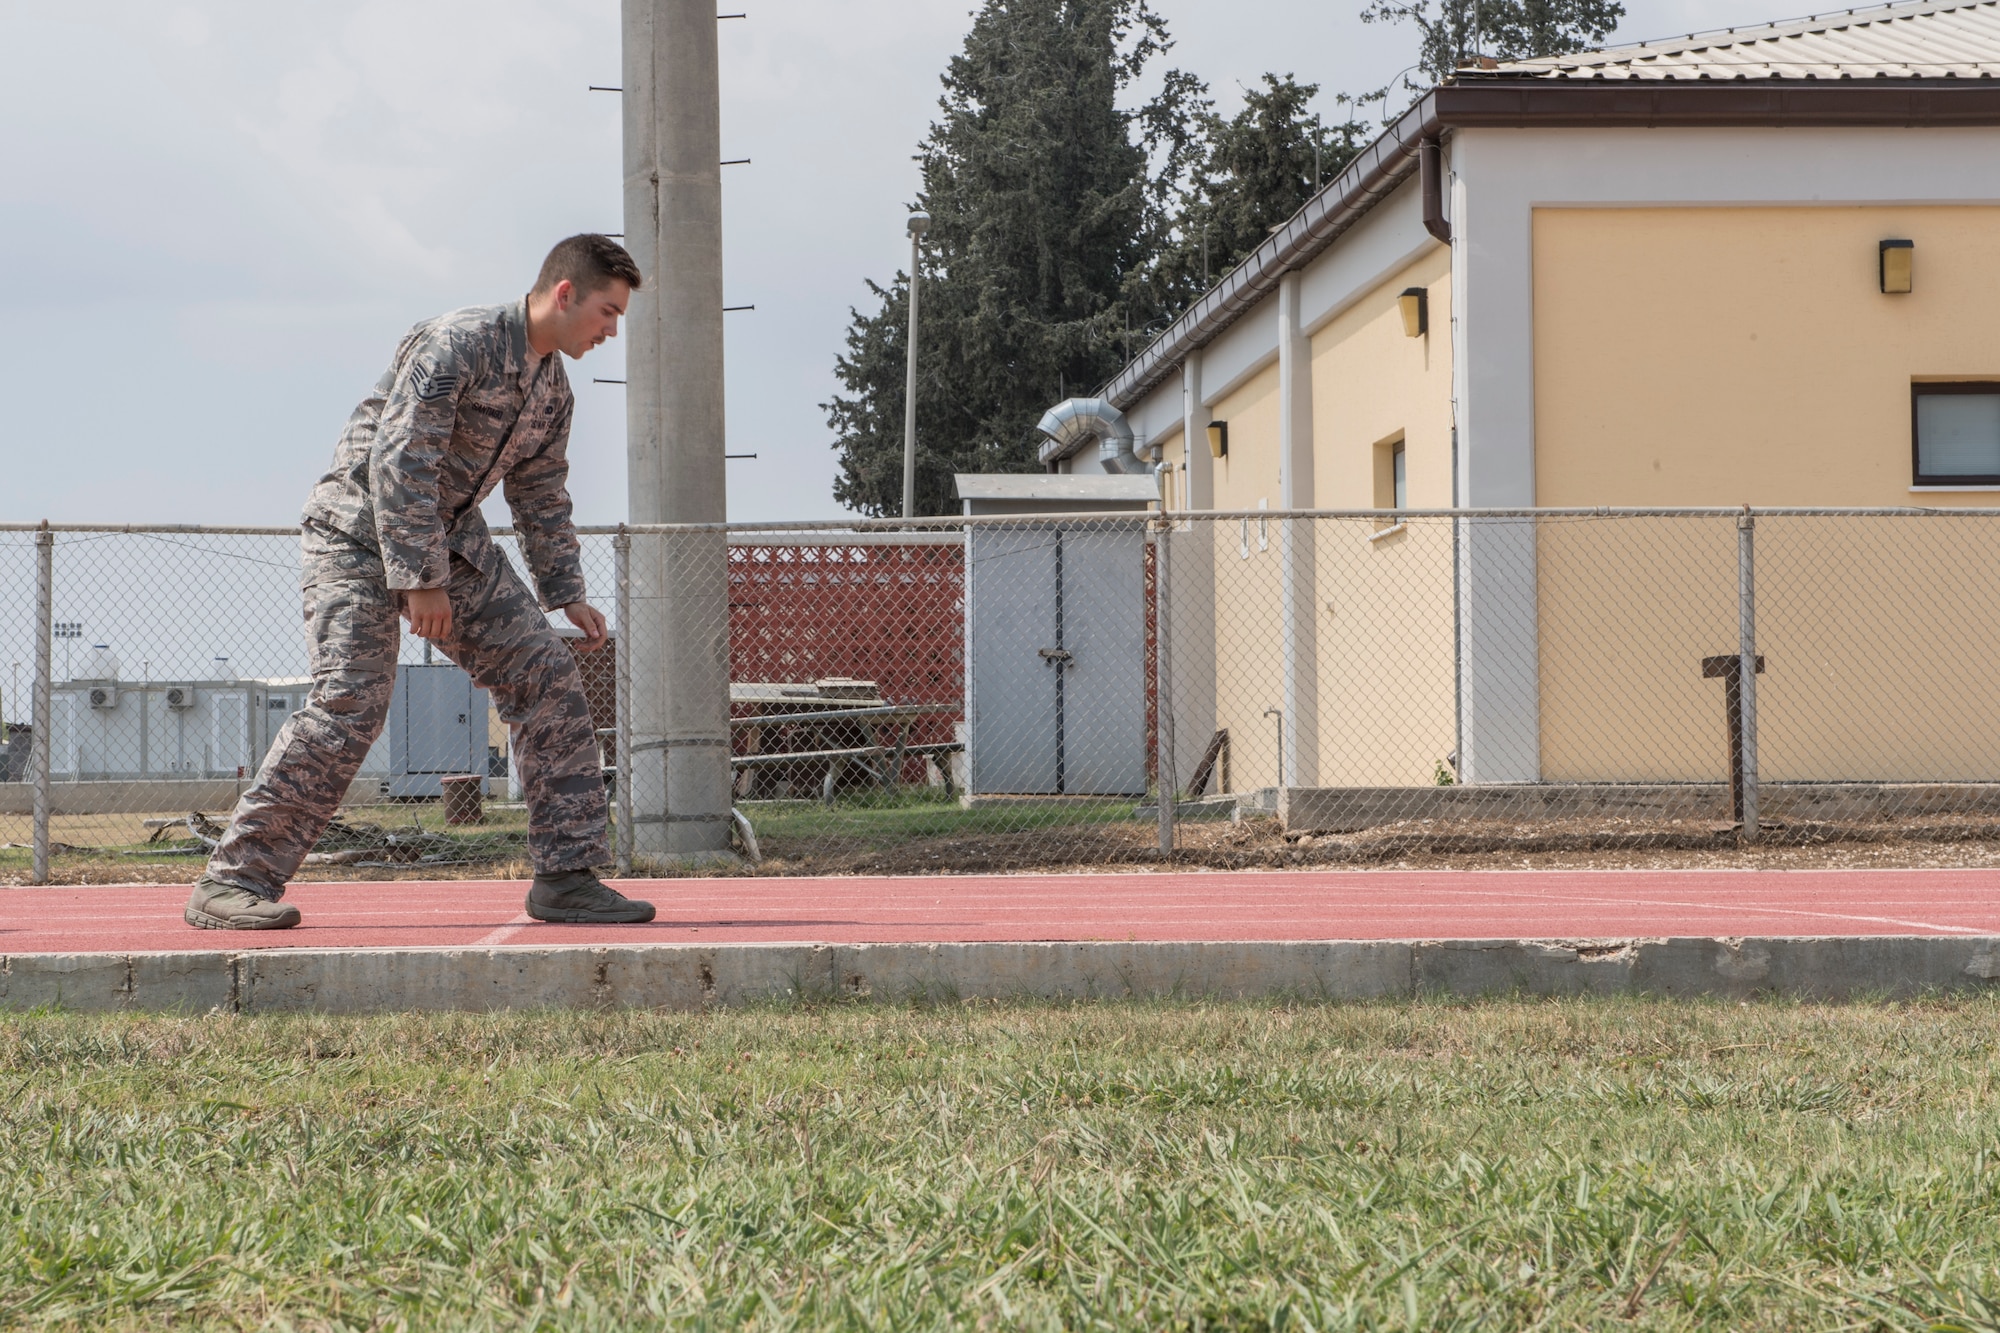 An Airman prepares to begin an obstacle course